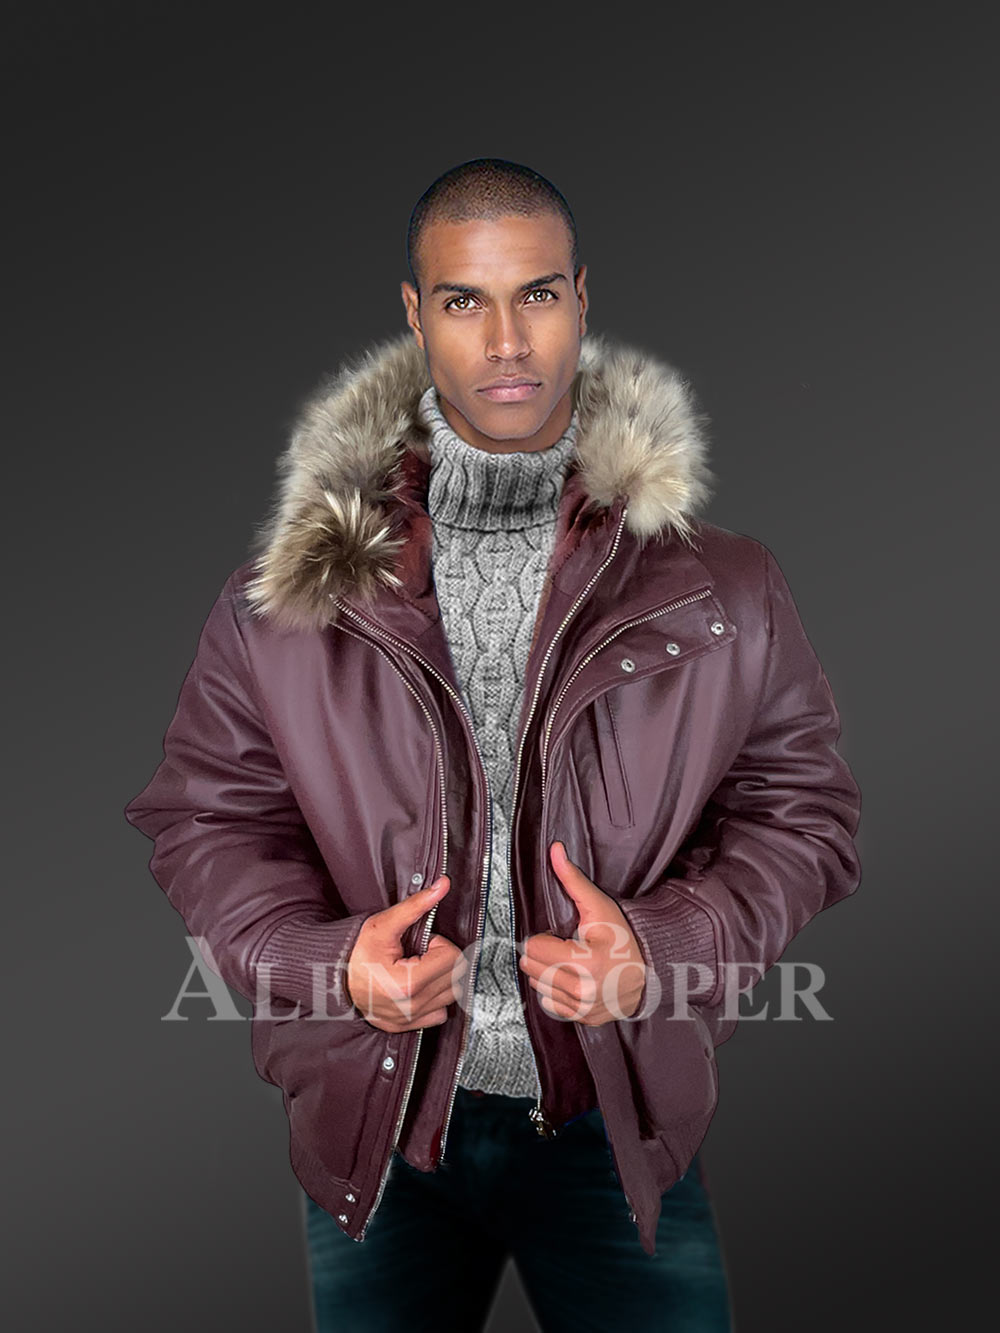 Leather Jacket with Fur Outlining the Hood for Modish Looks